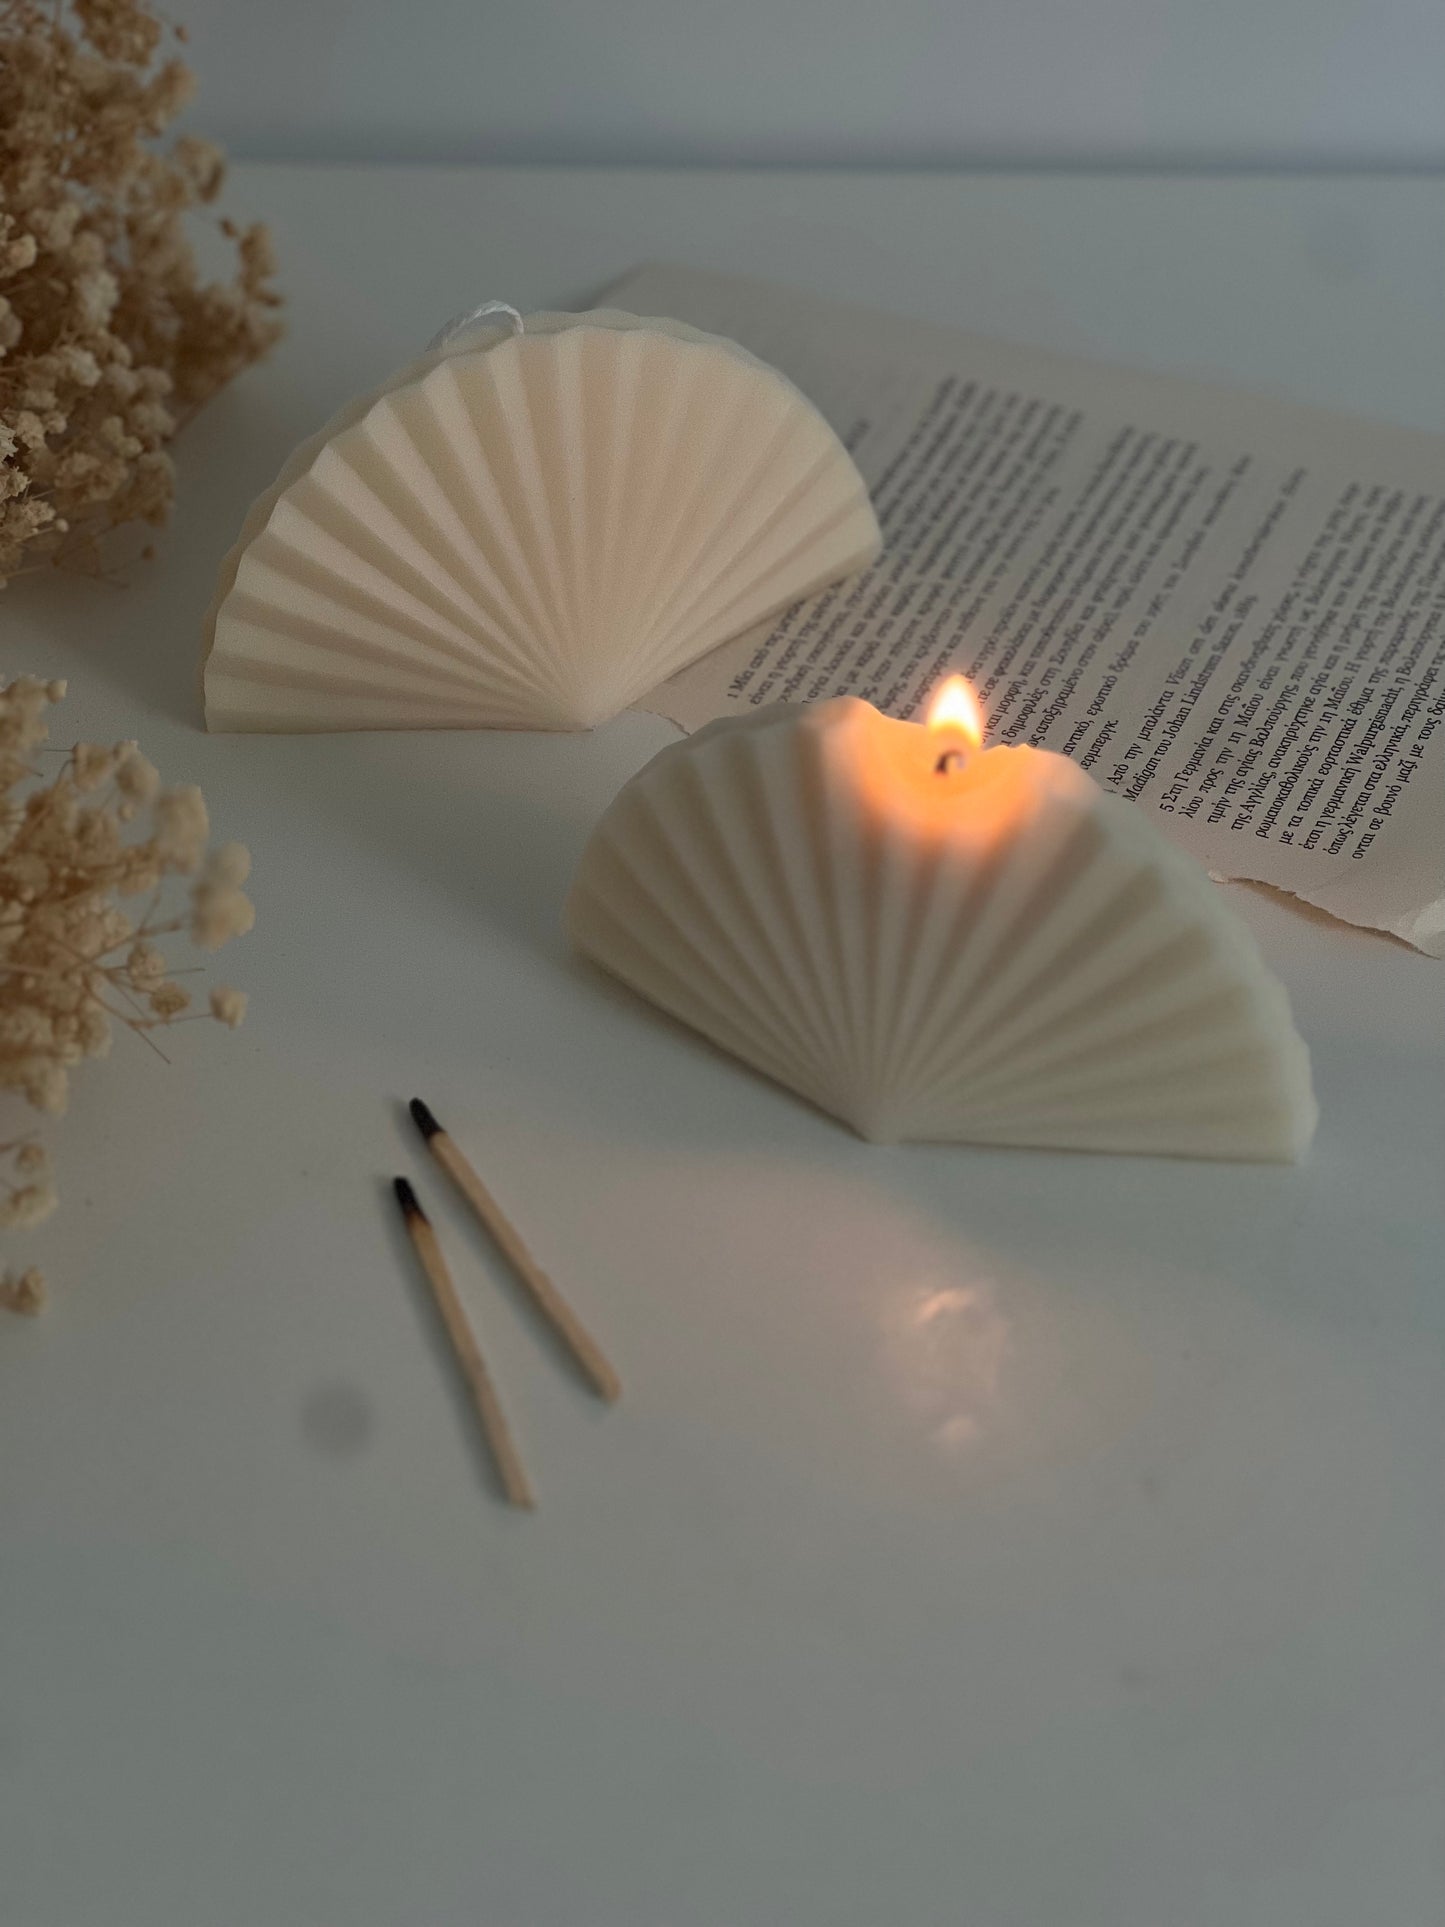 The Shell candle